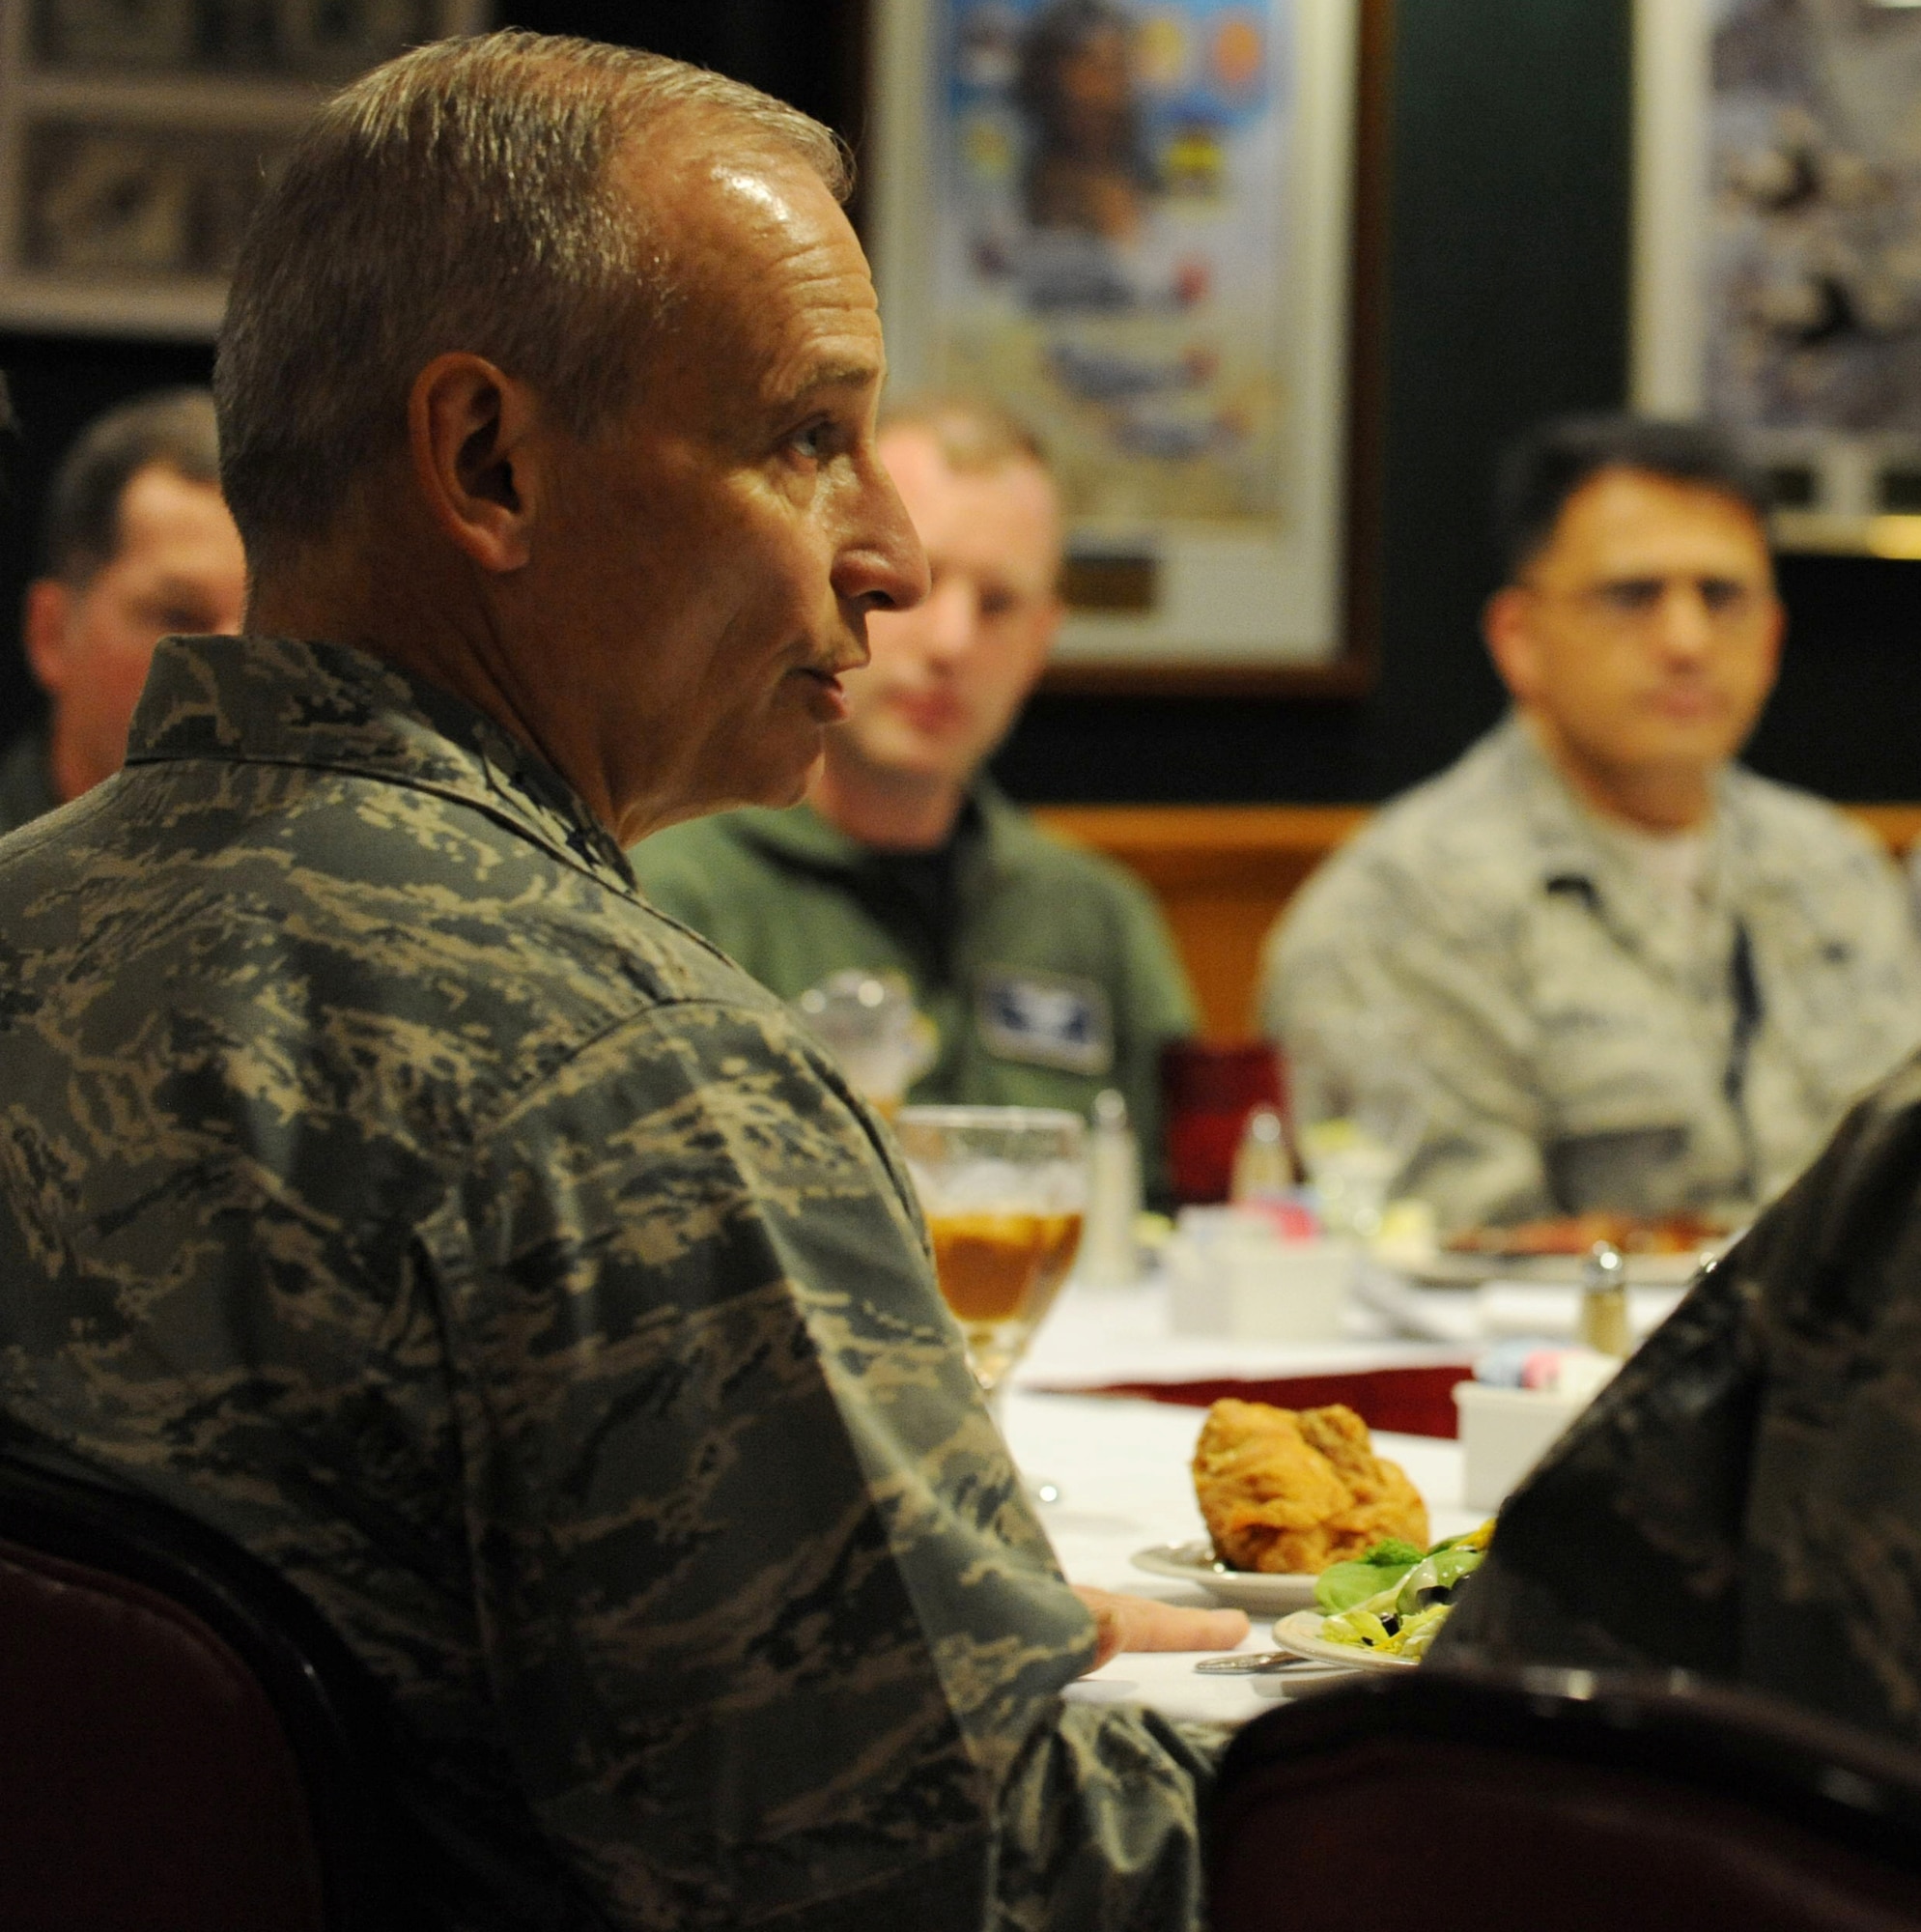 Lt. Gen. James Kowalski, Air Force Global Strike Command commander, speaks with squadron commanders of the 2nd Bomb Wing at Barksdale Air Force Base, La., May 19. The general visited with Airmen at the dorms, dining facility and the Barksdale Club during his visit. (U.S. Air Force photo/Airman 1st Class Micaiah Anthony)(RELEASED) 